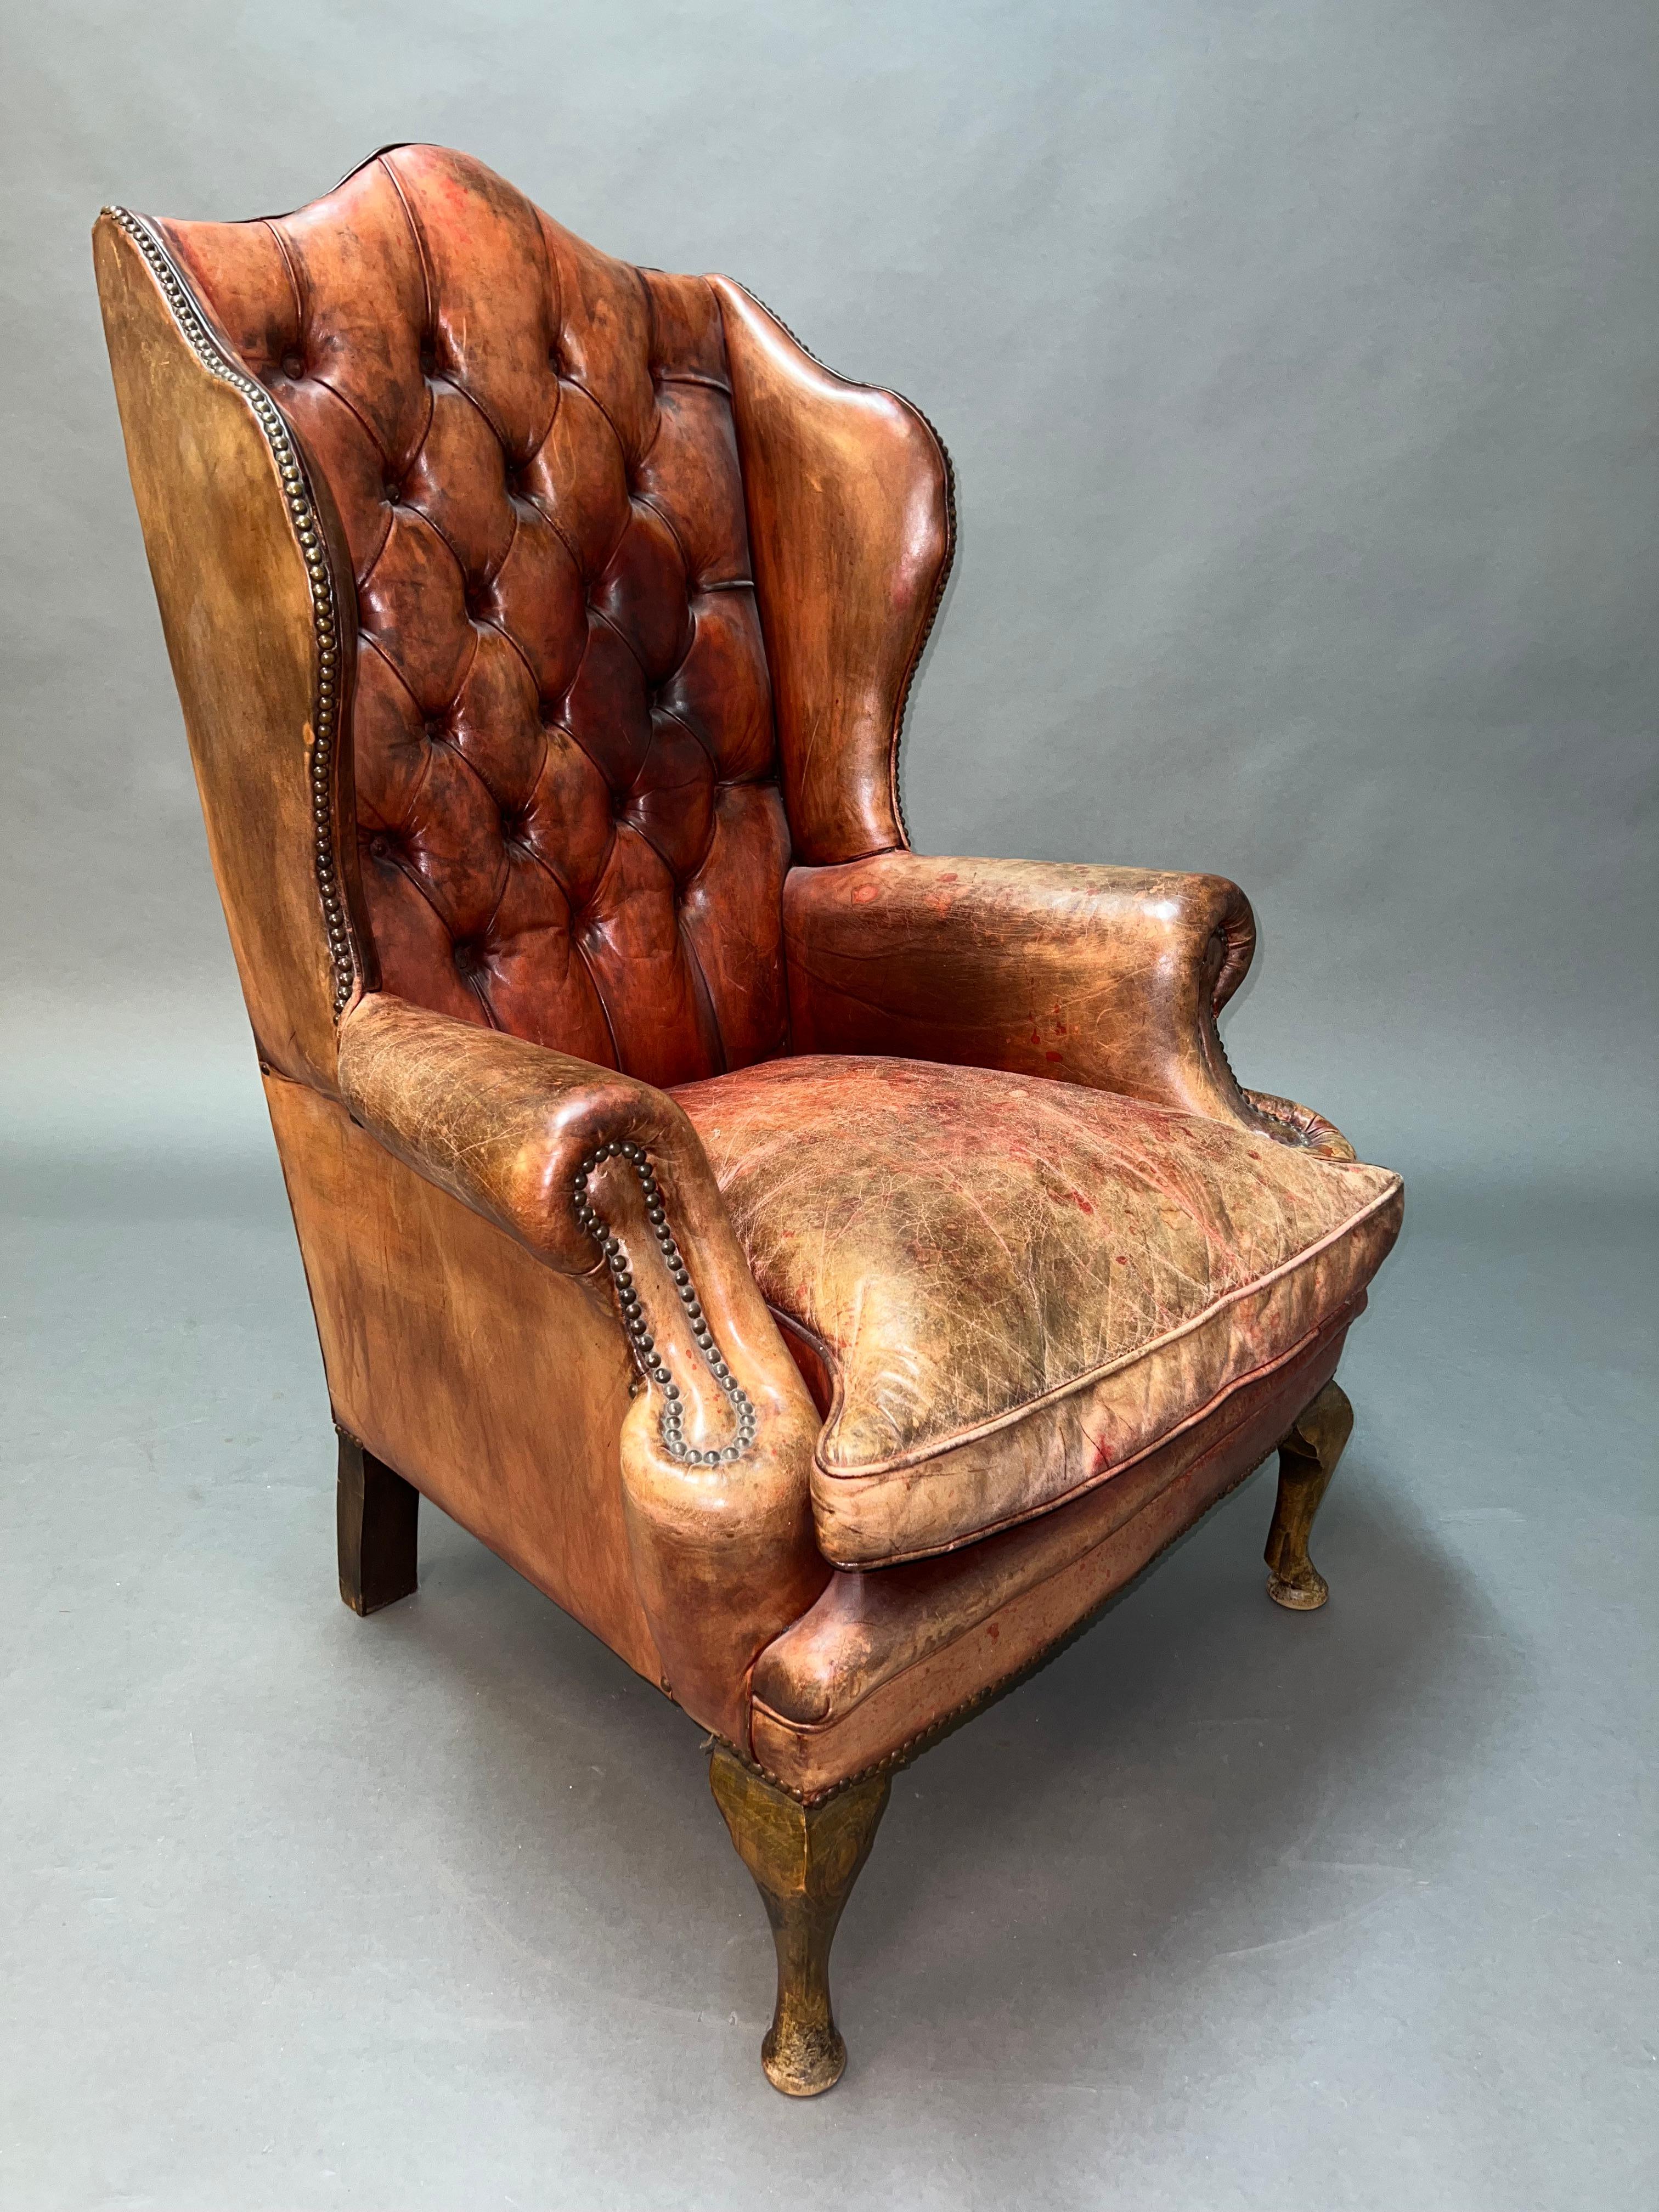 Vintage Brown Leather Tufted Chesterfield Wingback Armchair Original, circa 1880 For Sale 5